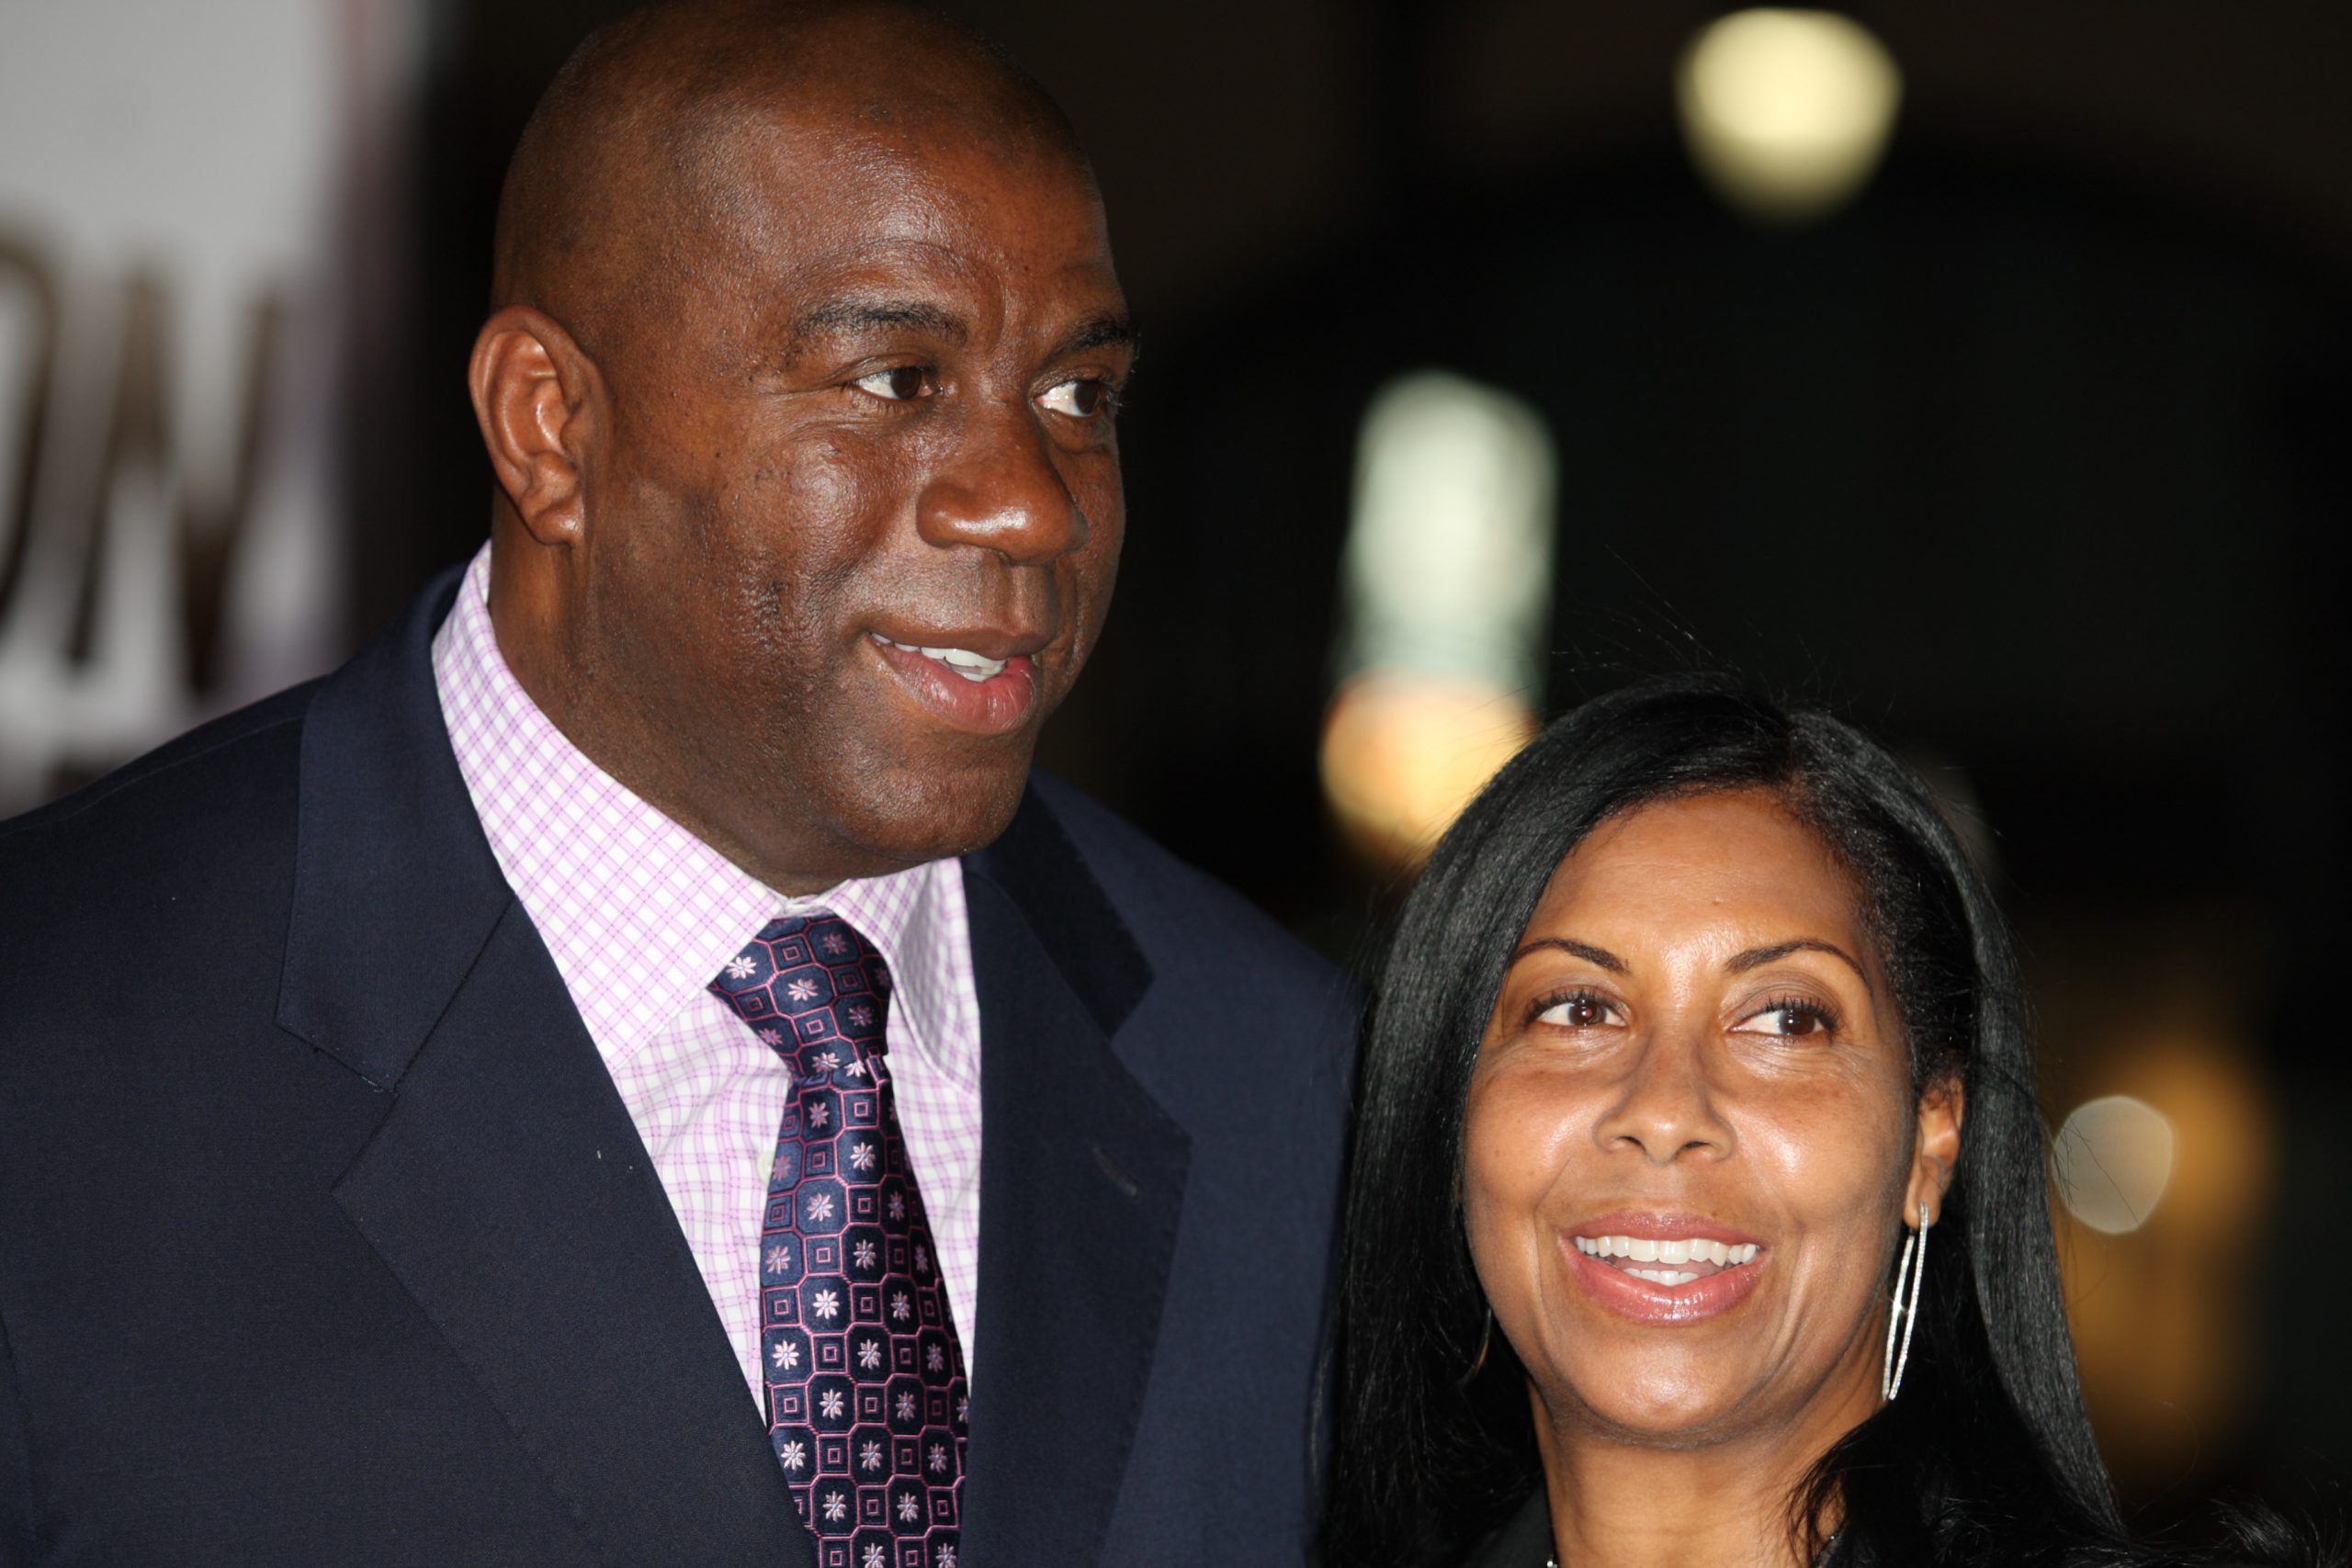 11 January 2010: Earvin "Magic" Johnson and wife Earlitha "Cookie" Kelly attend The Book of Eli premiere on January 11th 2010 at Grauman's Chinese Theater in Hollywood, California.